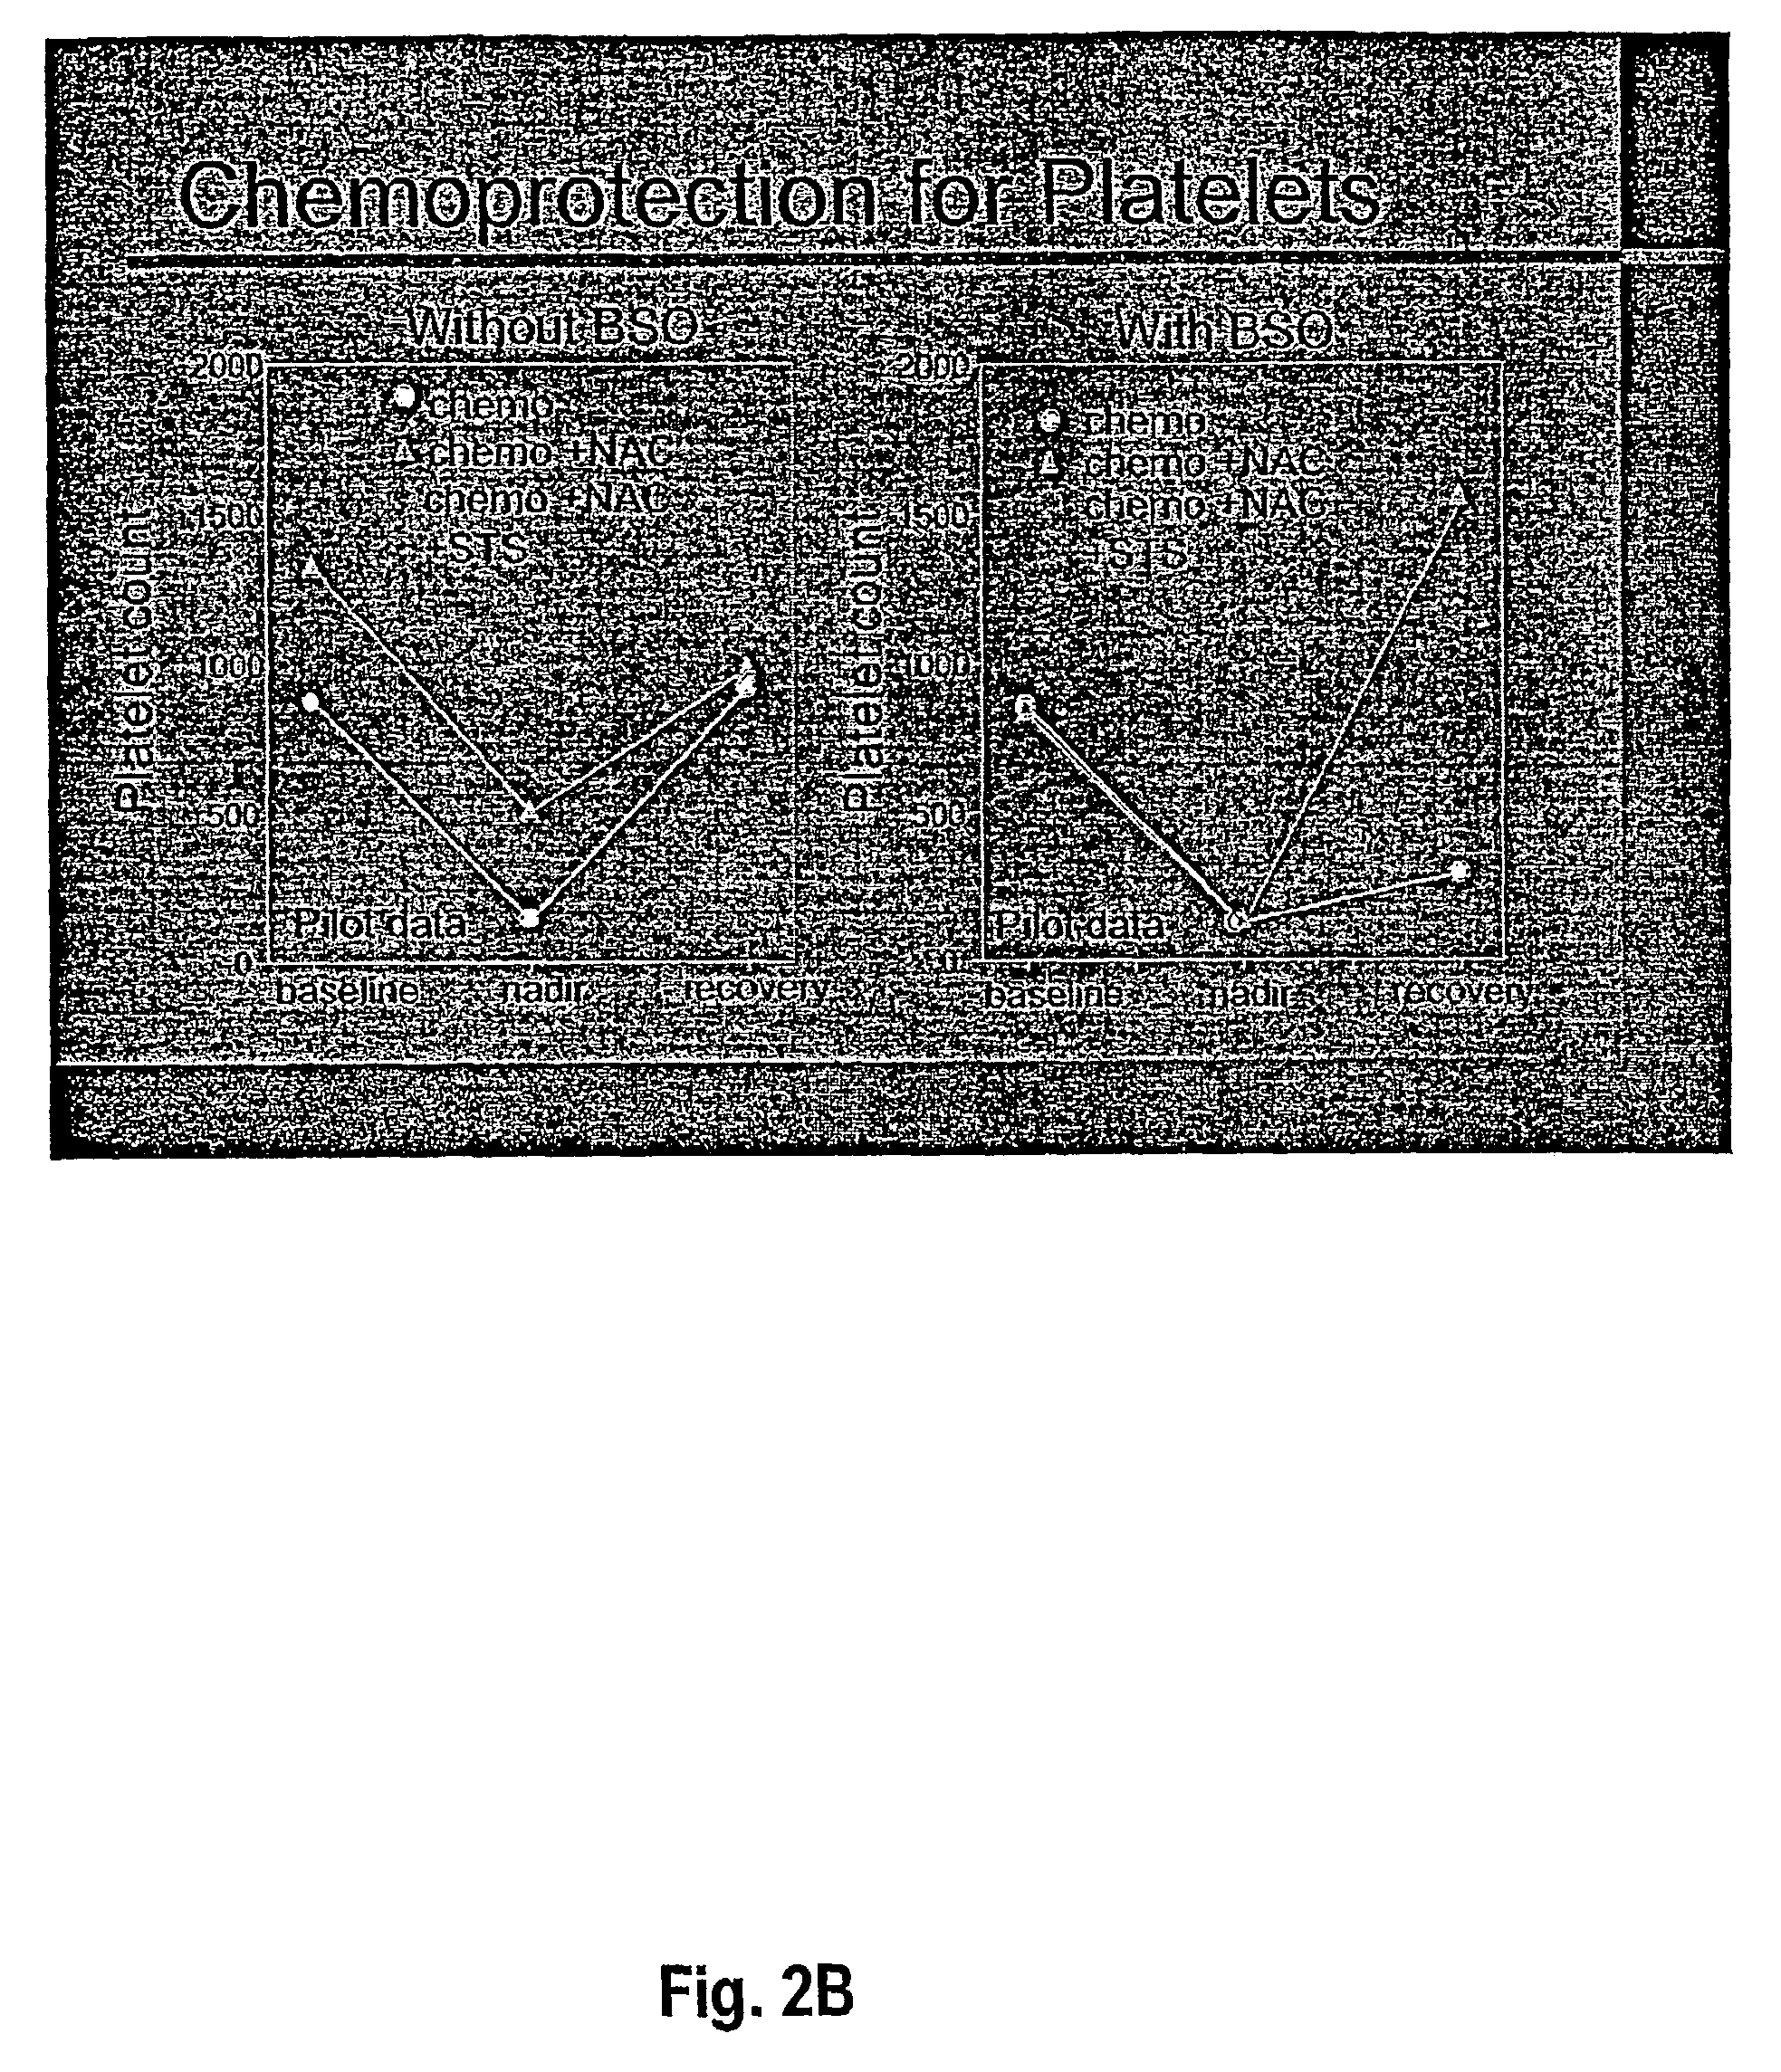 Administration of a thiol-based chemoprotectant compound